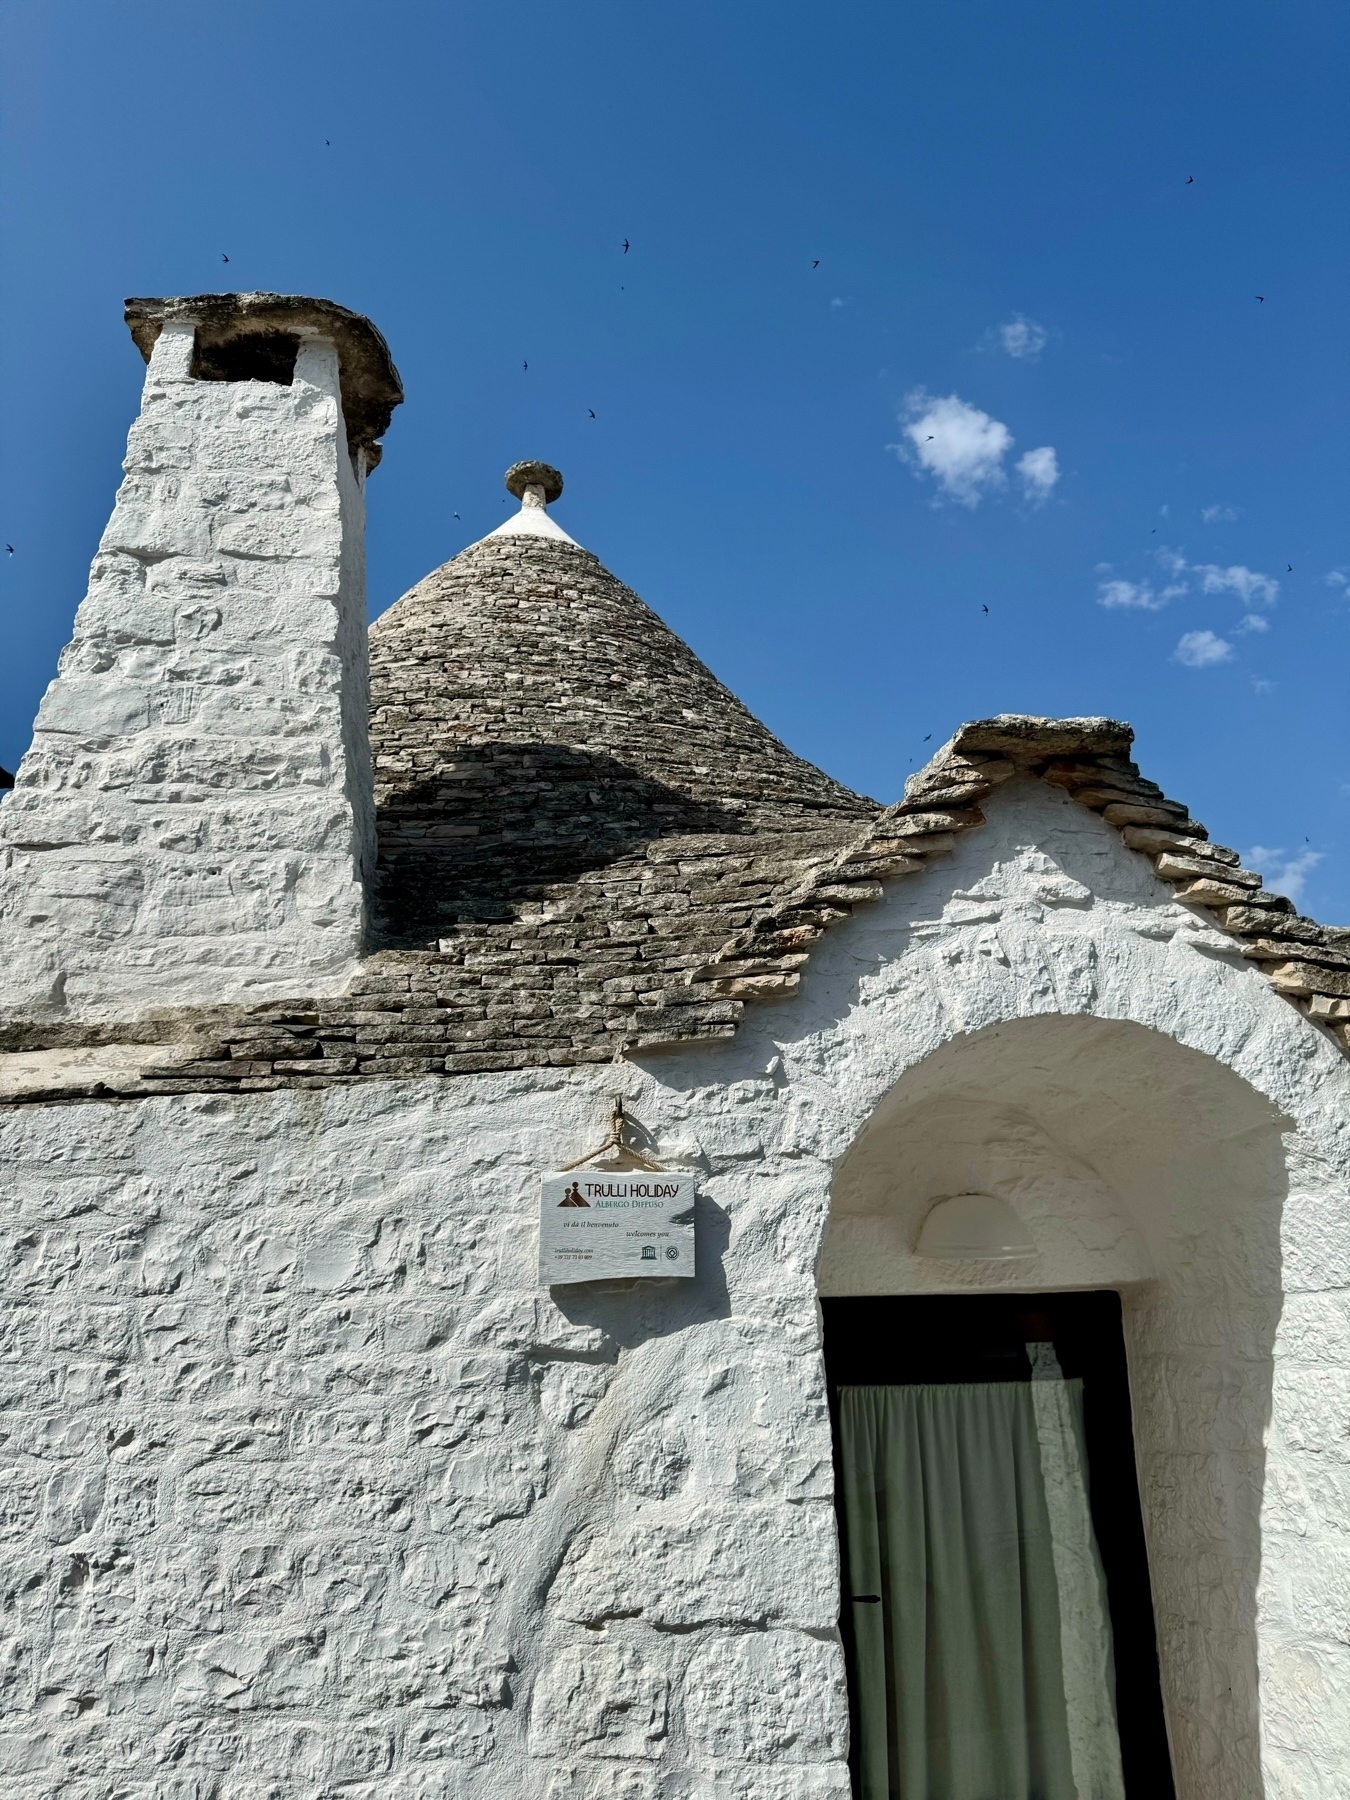 A close-up view of a traditional trullo house with whitewashed stone walls and a conical roof made of stone slabs. The house features a chimney and an arched entrance covered with a curtain. 